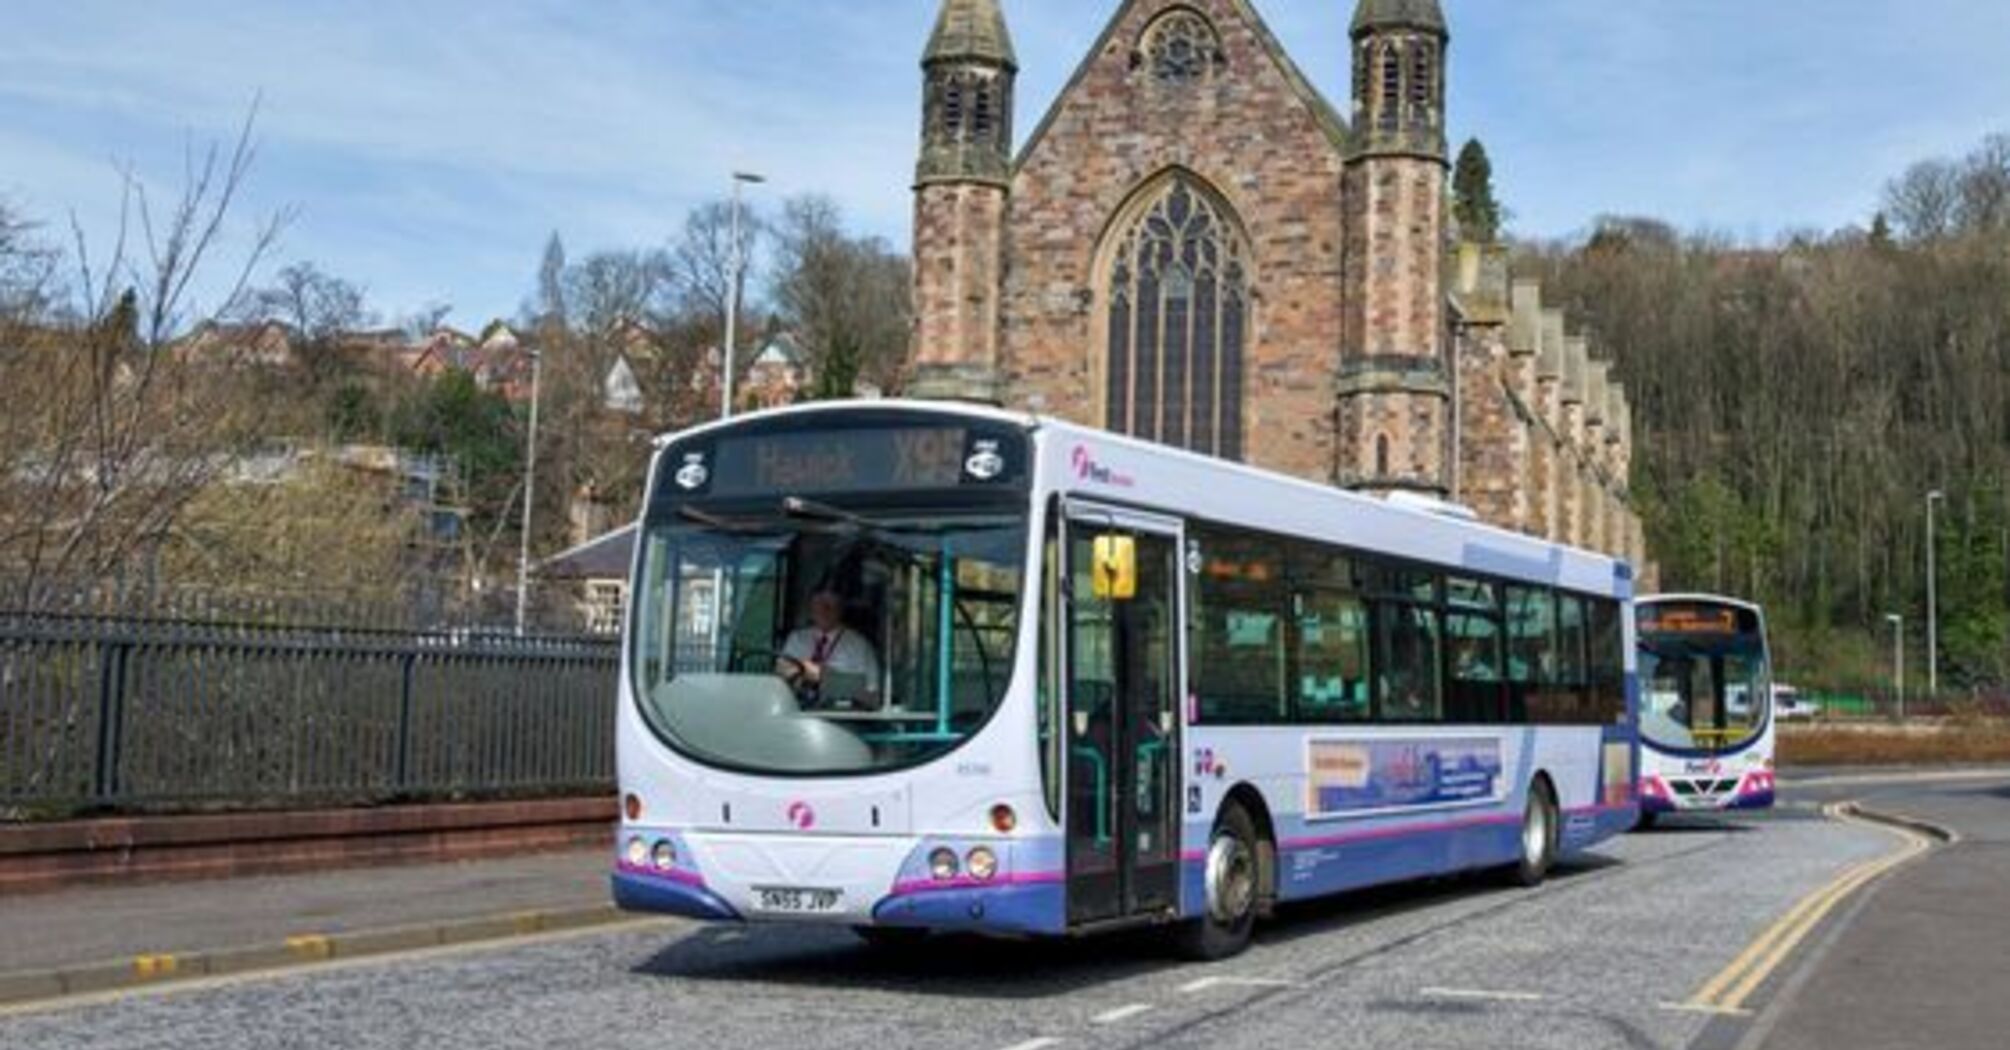 In Scotland, bus and stagecoach will run free of charge on weekends